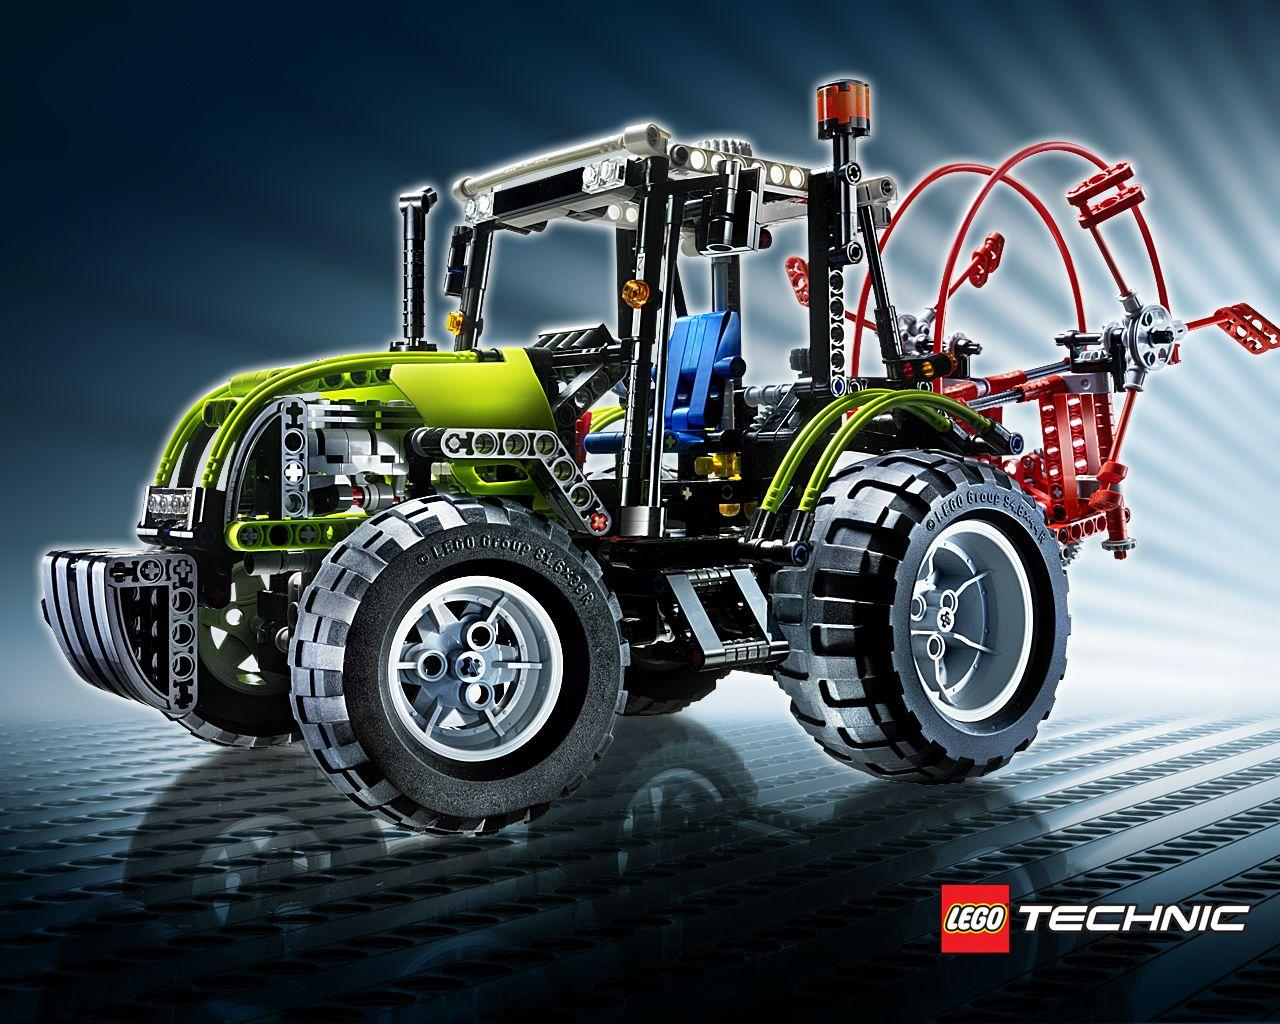 Lego Technic. Free Desktop Wallpaper for Widescreen, HD and Mobile